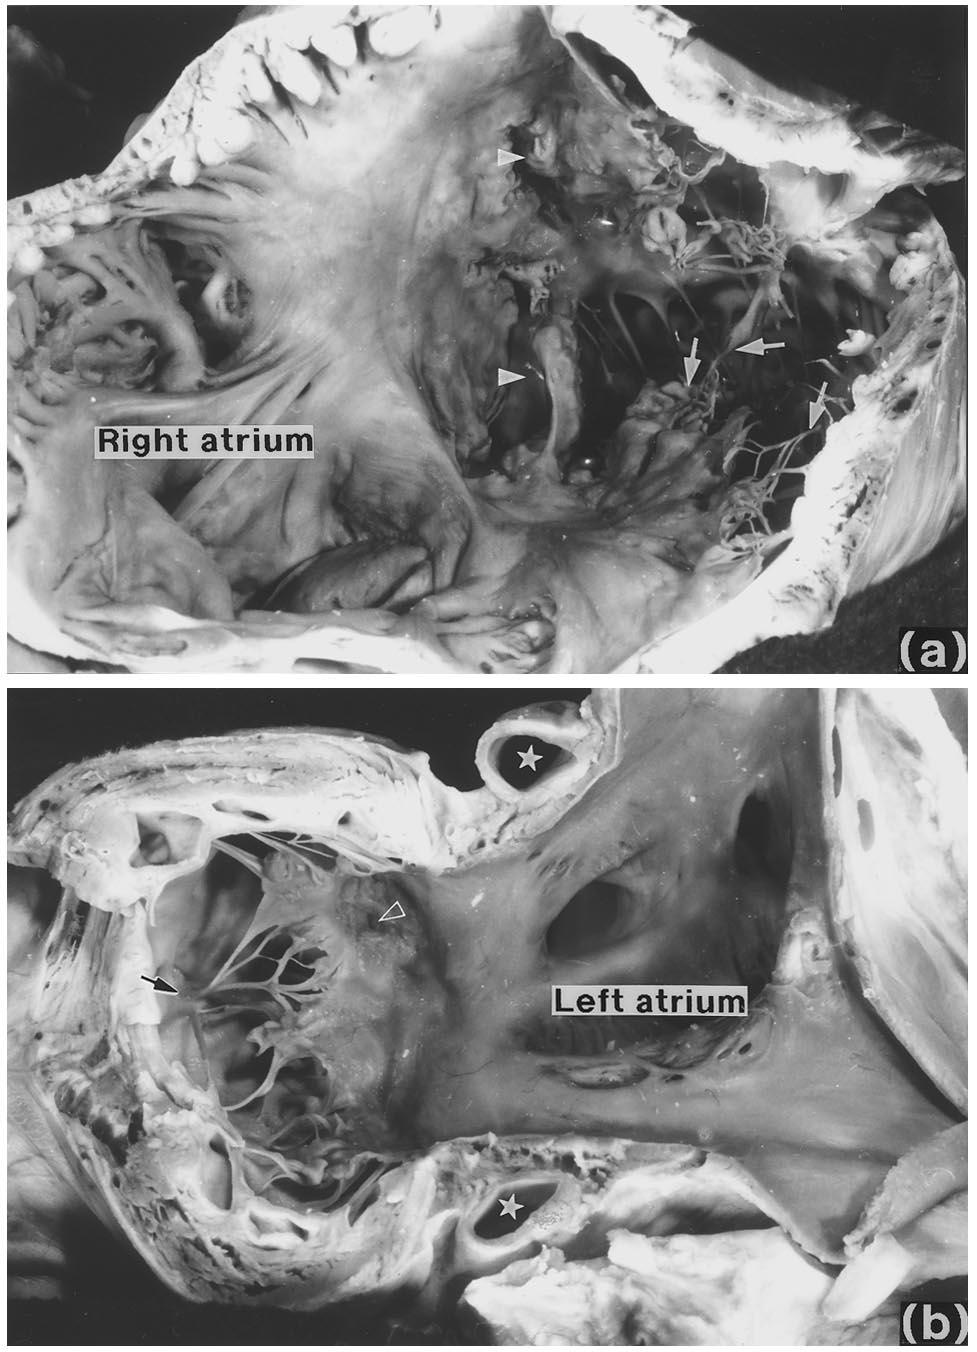 C. Stamm et al. / European Journal of Cardio-thoracic Surgery 12 (1997) 587 592 589 was discovered involving both the tricuspid and mitral valves in one case (Fig. 1b).